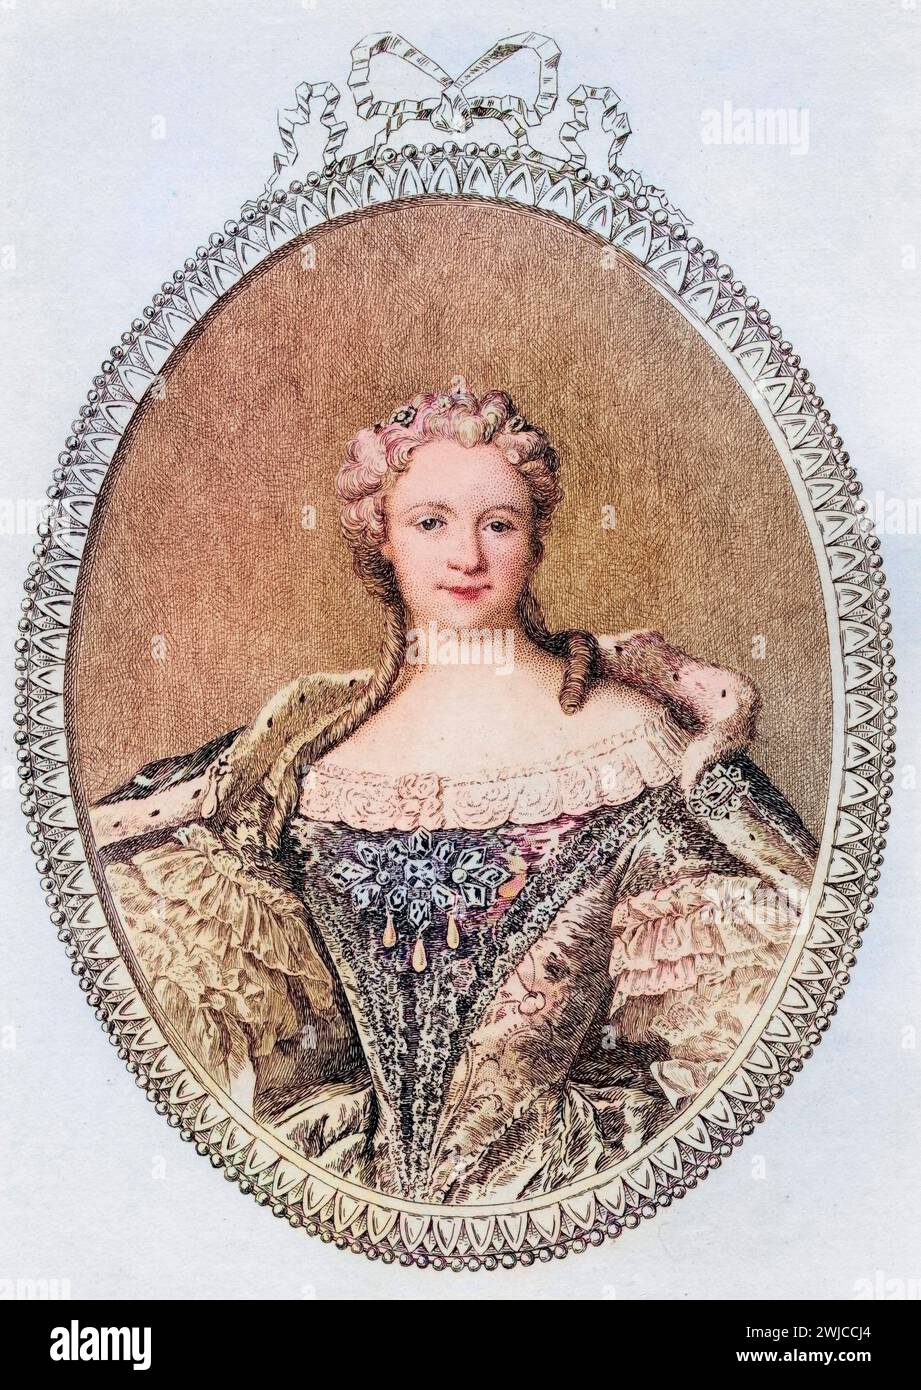 Marie-Catherine -Sophie-Felicite Leczinska,1703-1768. Queen of France and Navarre., wife of Louis XV. Etching by Mercier after the painting by Tocque. Stock Photo